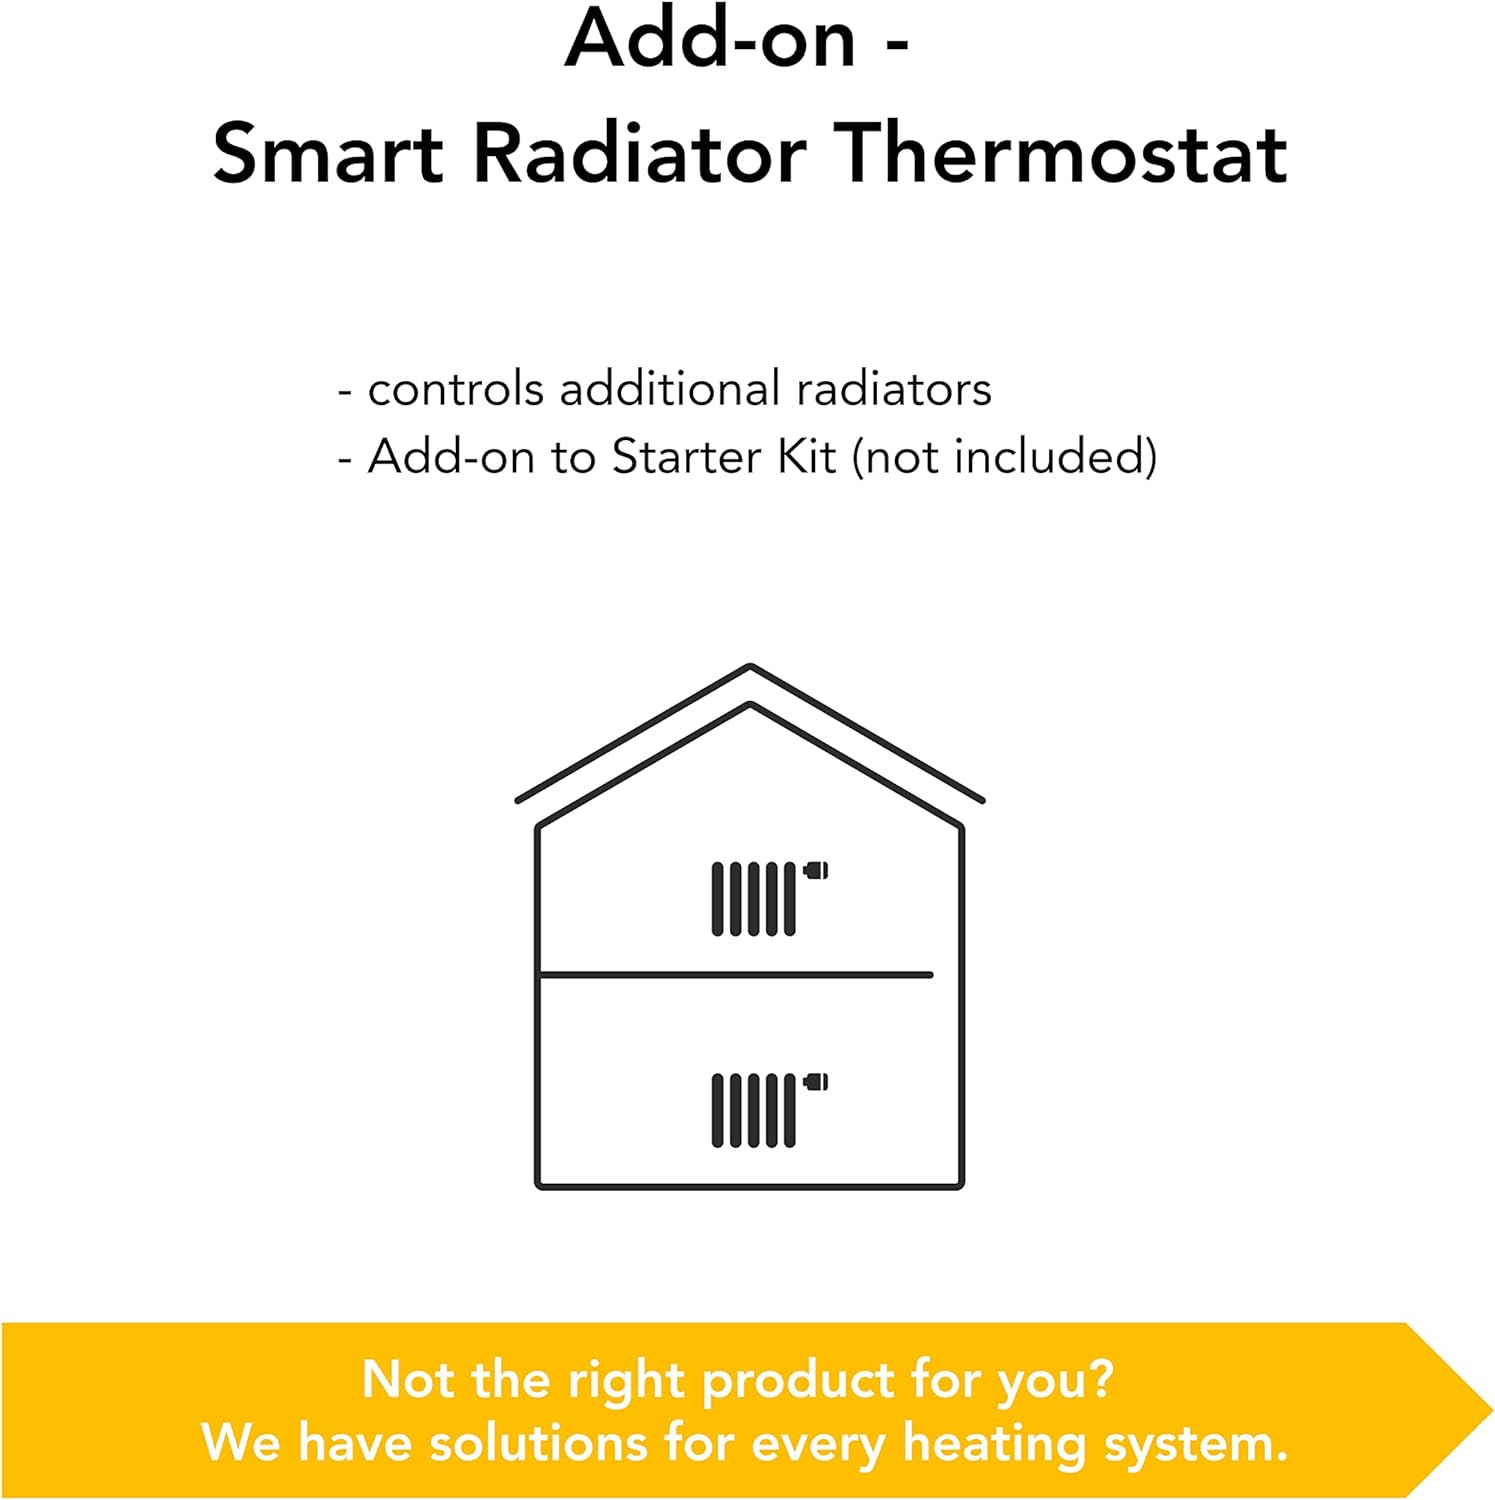 tado° Smart Radiator Thermostat 3 - Pack - WiFi Add - On Smart Radiator Valve For Digital Multi Room Control - Easy Installation - Save Heating Costs - Works With Alexa, Apple HomeKit And Google Assistant - Amazing Gadgets Outlet